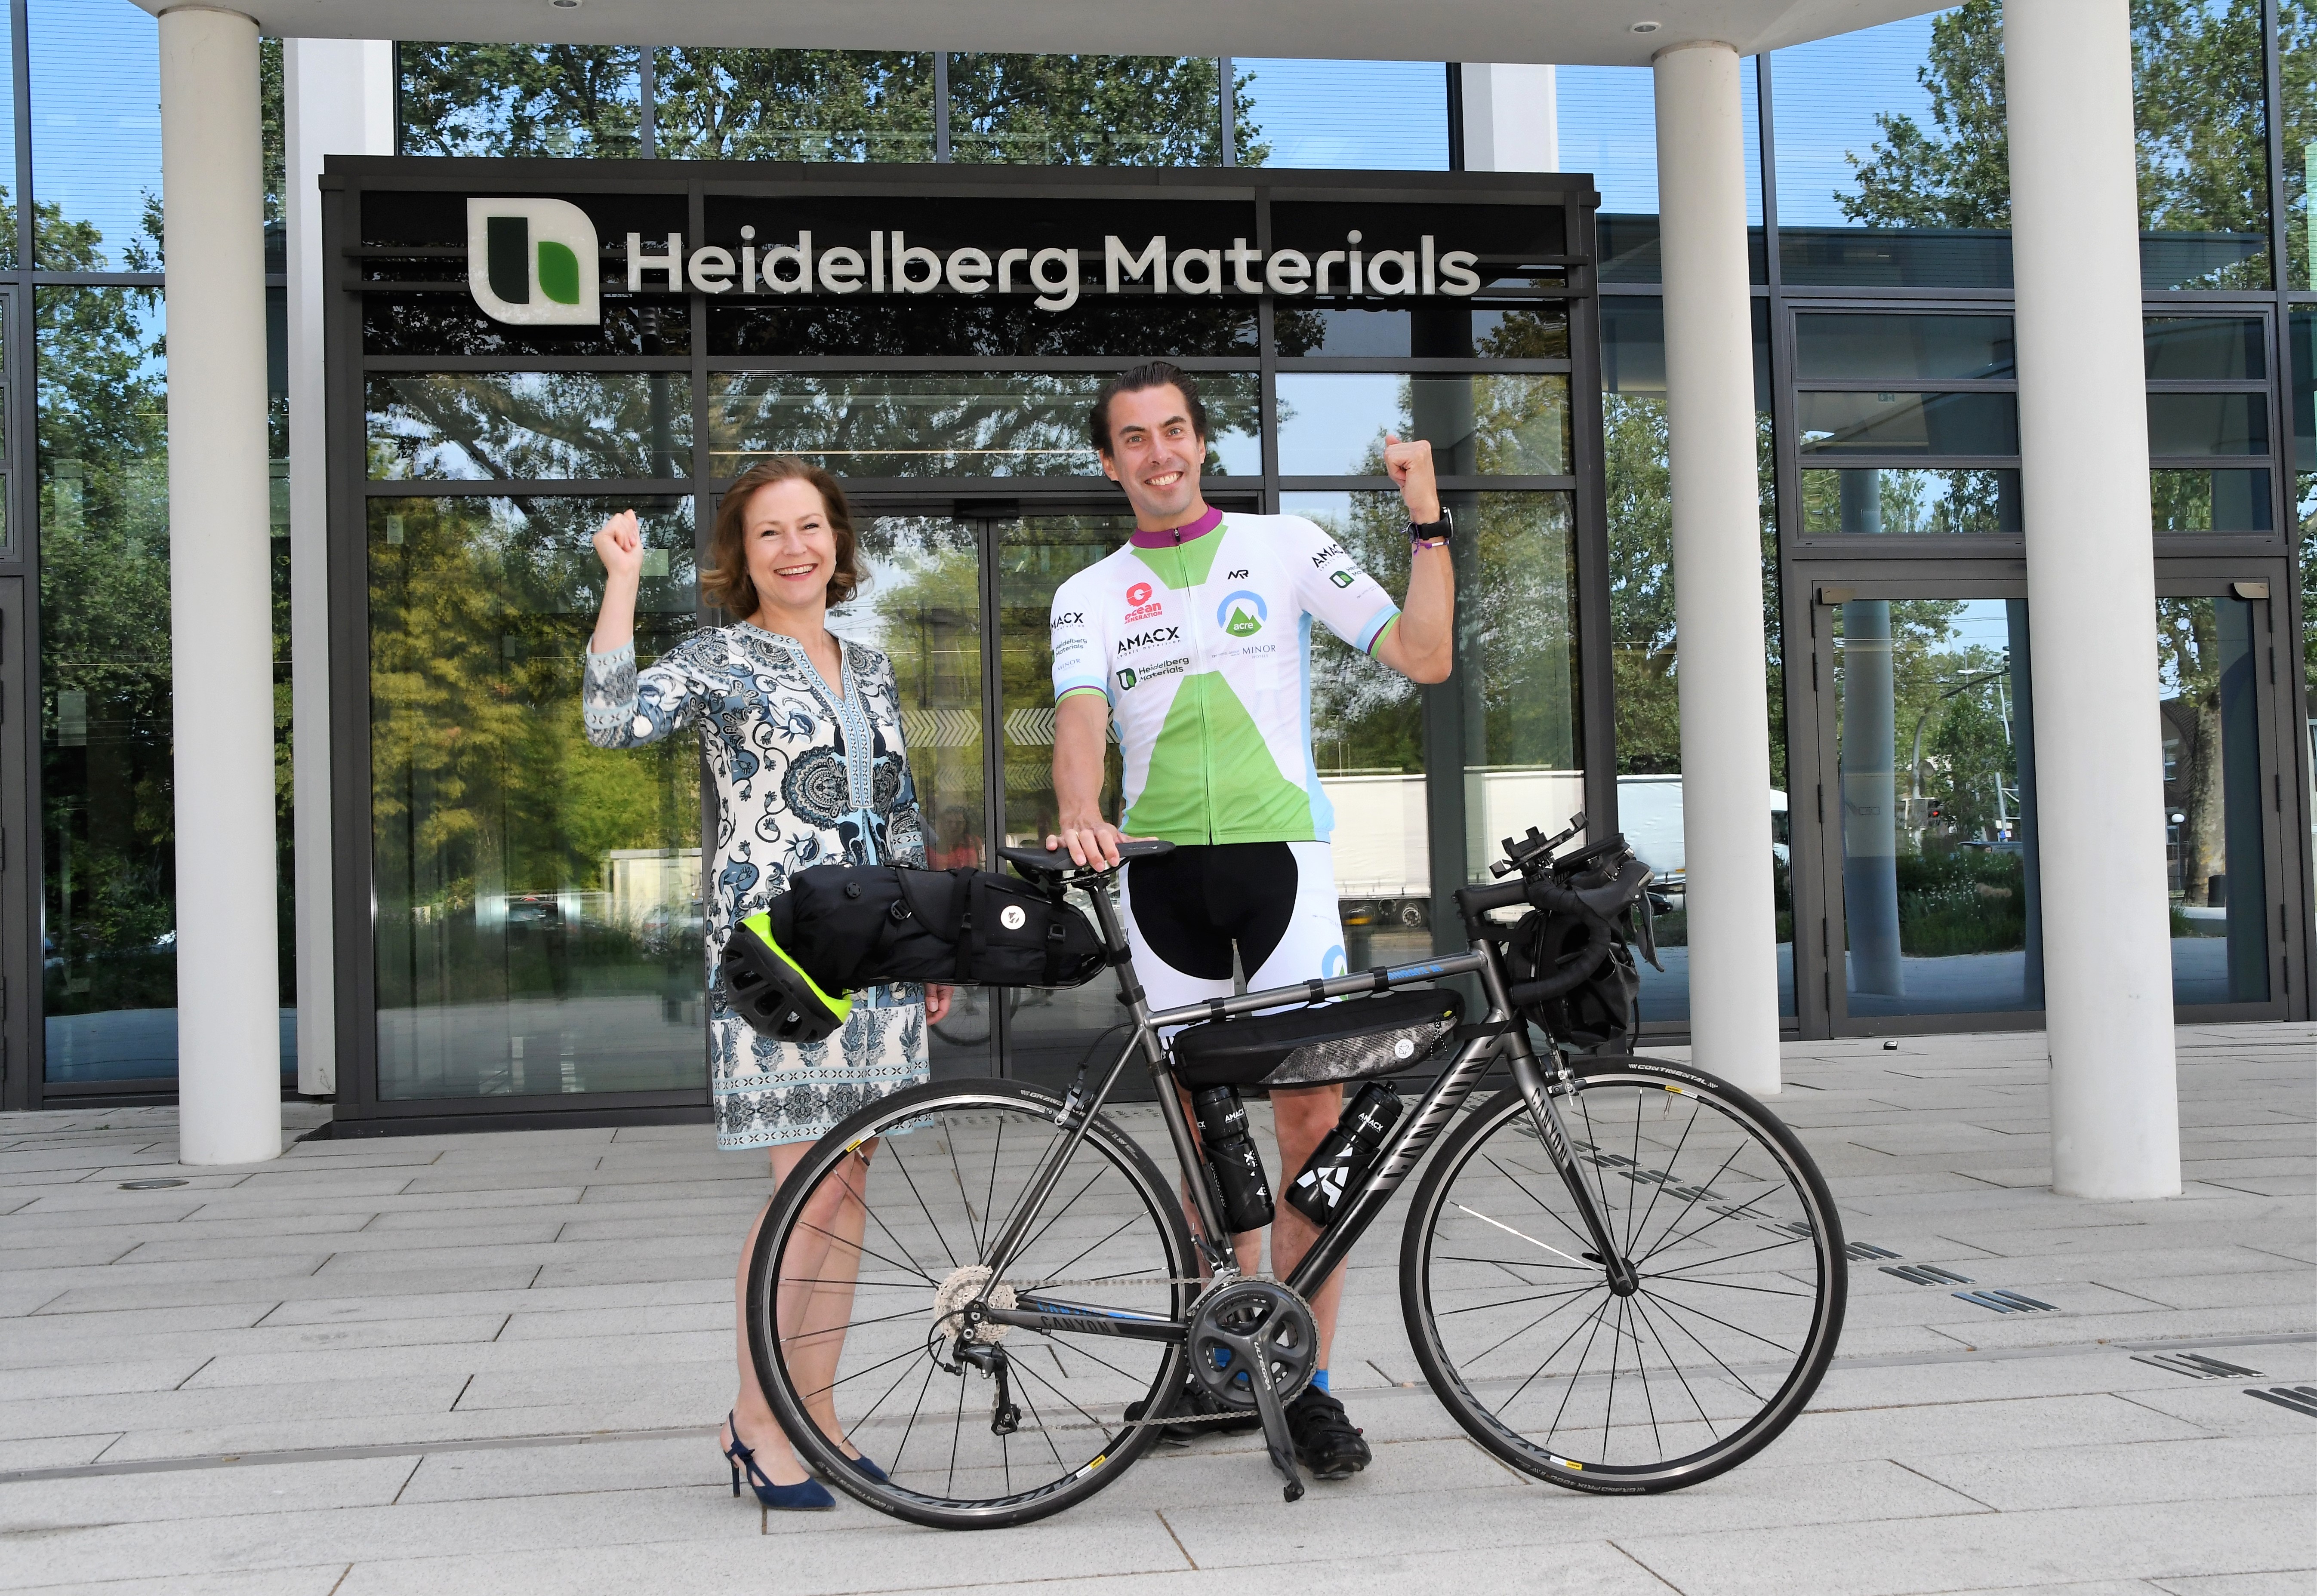 A man with a bicycle stands together with a woman in front of the Heidelberg Materials headquarters